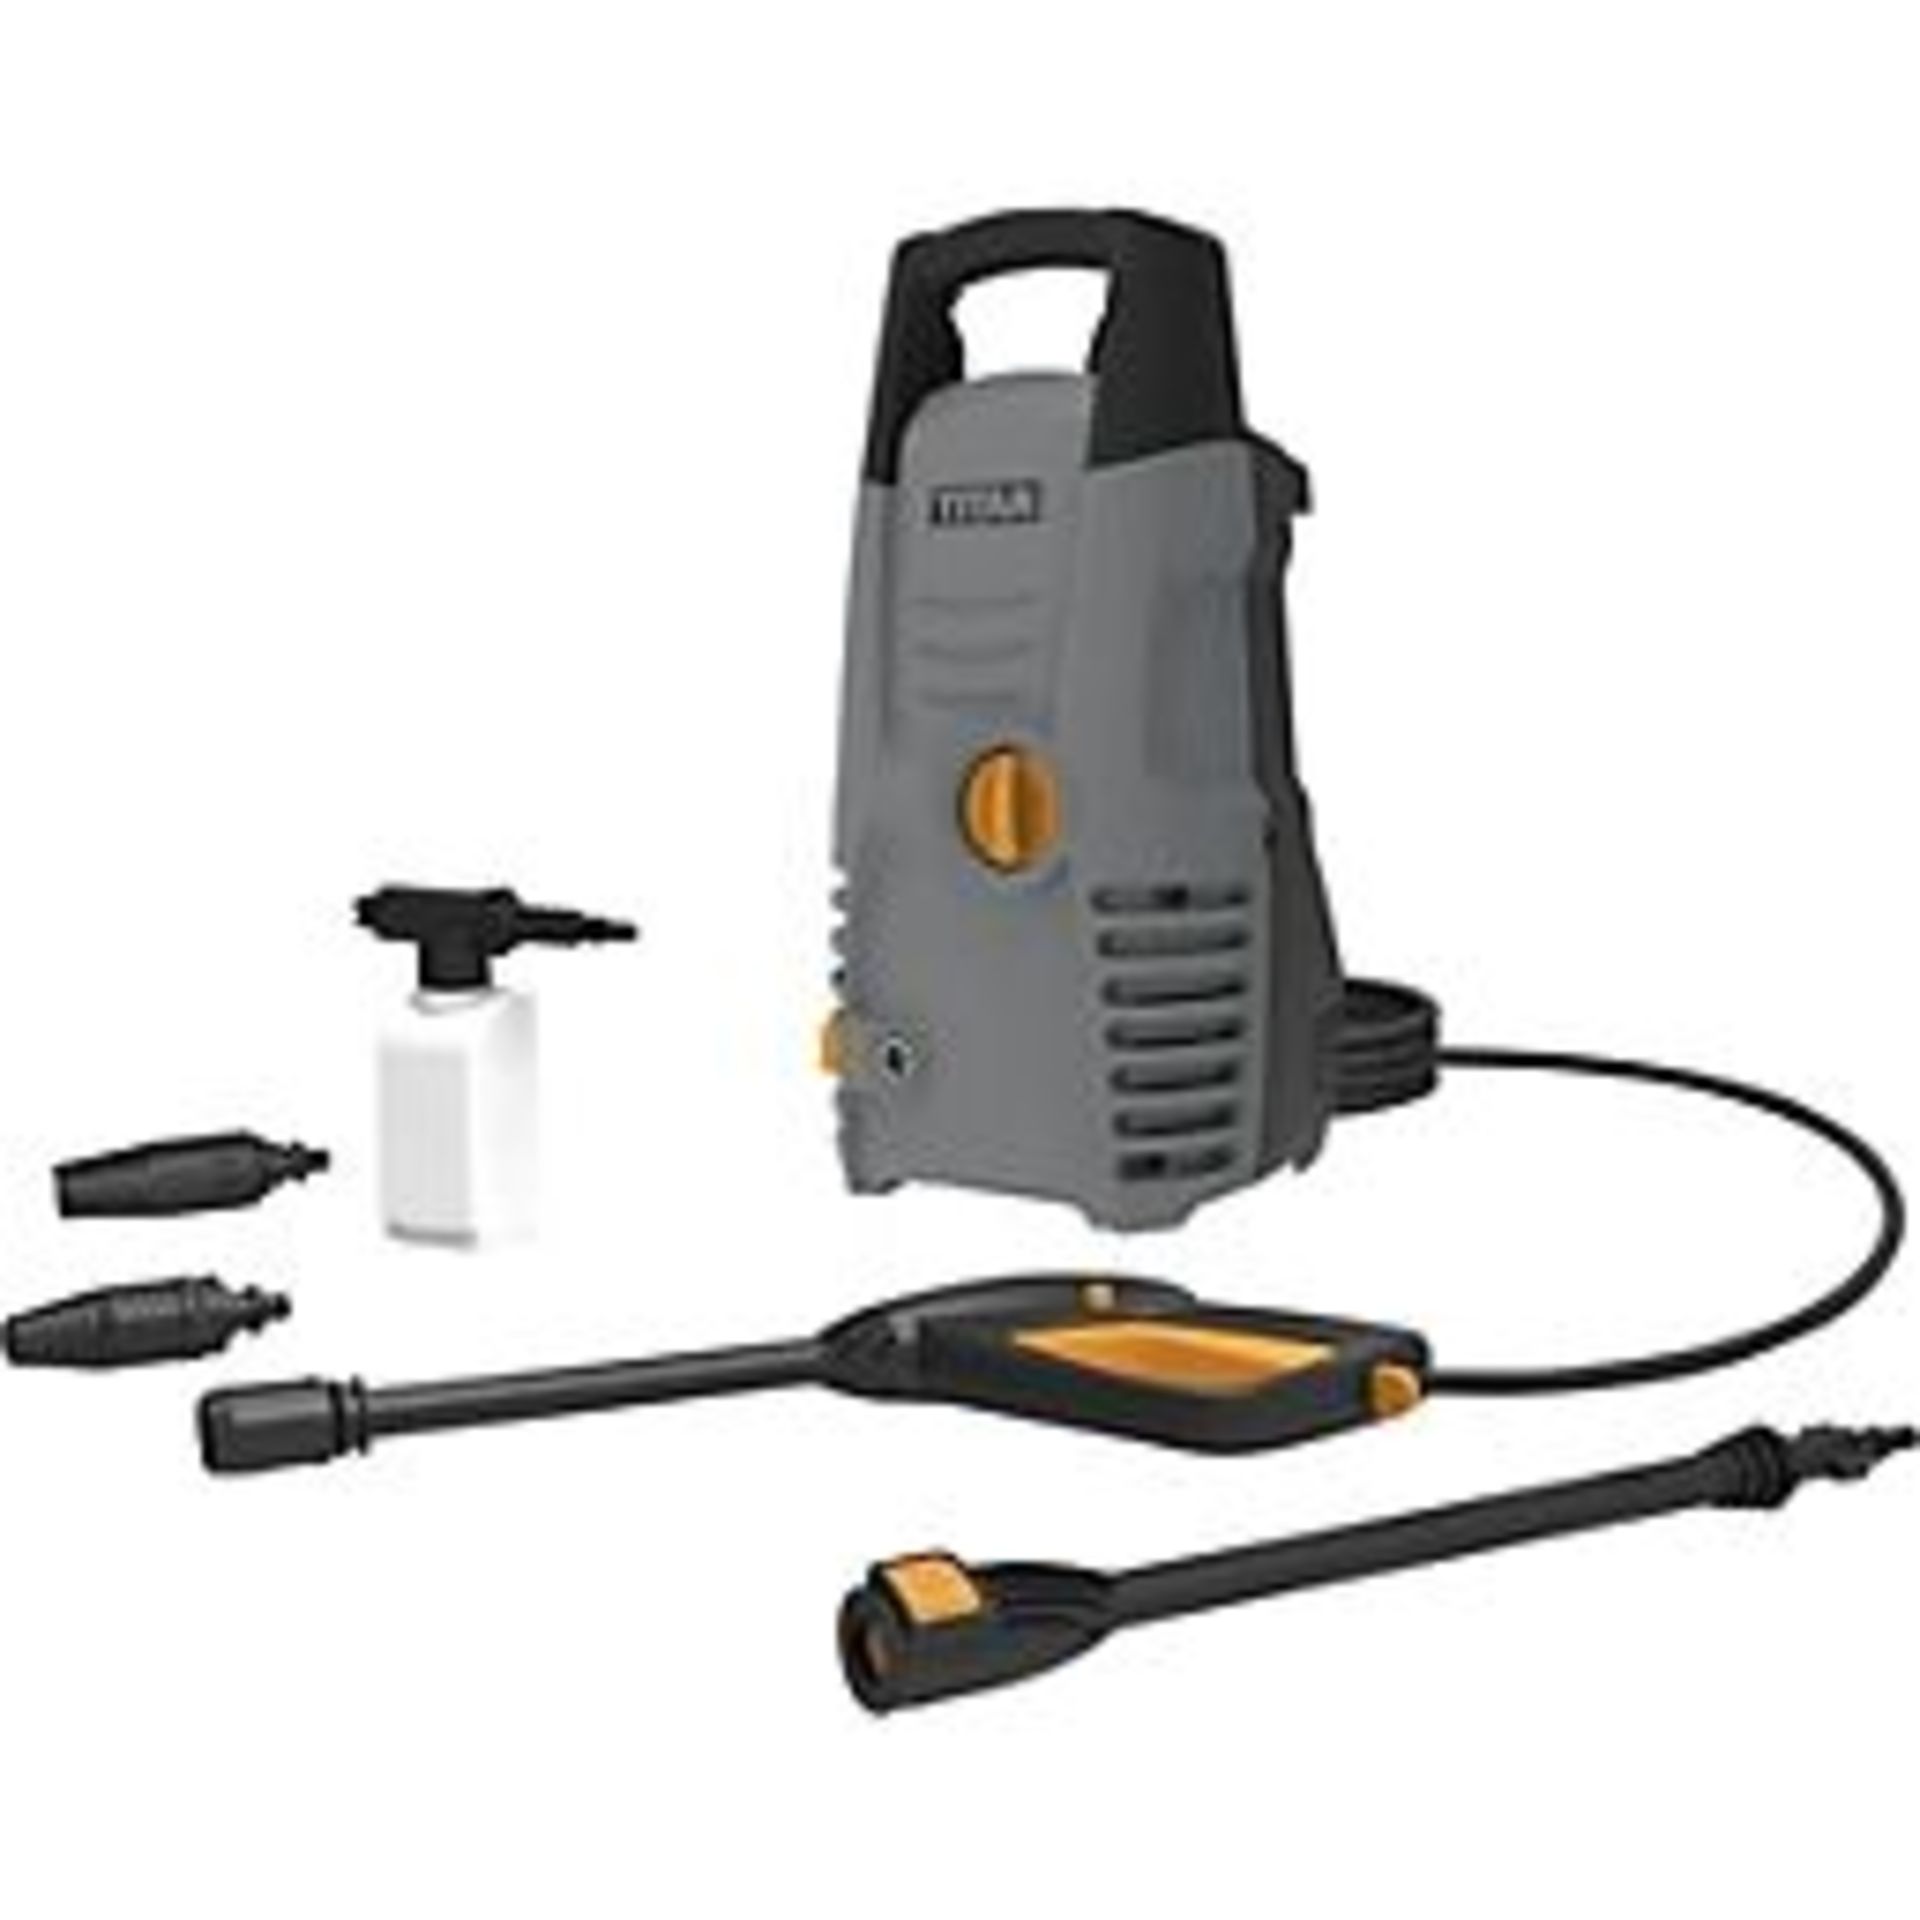 TITAN 100BAR ELECTRIC HIGH PRESSURE WASHER 1.3KW 230V. - R14.12. Compact design with space-saving